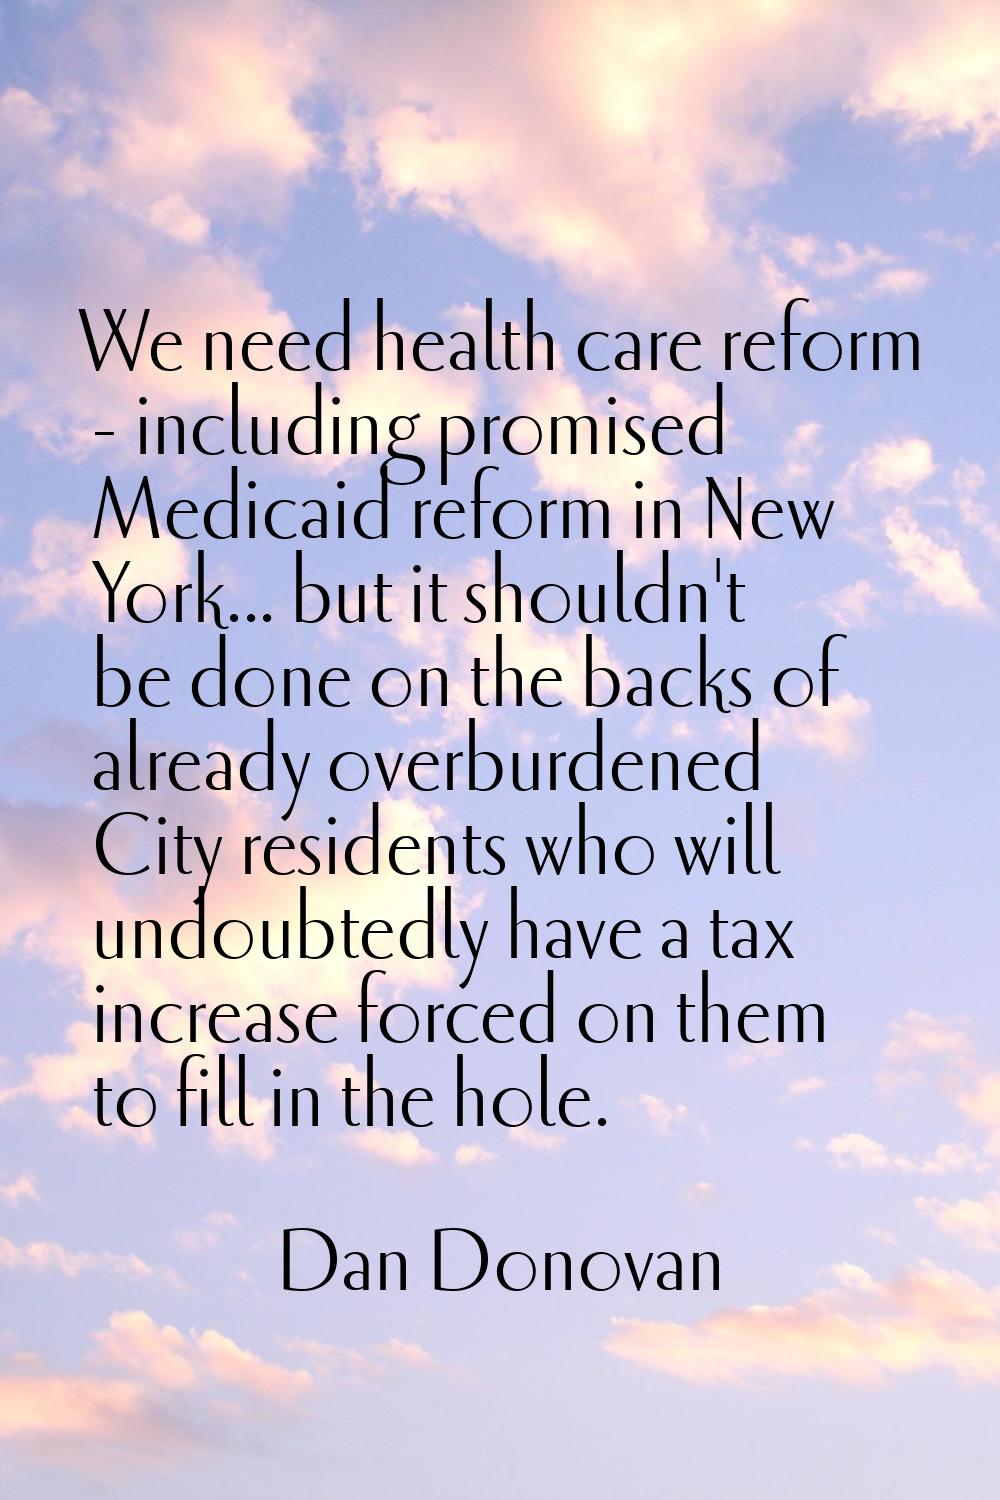 We need health care reform - including promised Medicaid reform in New York... but it shouldn't be 